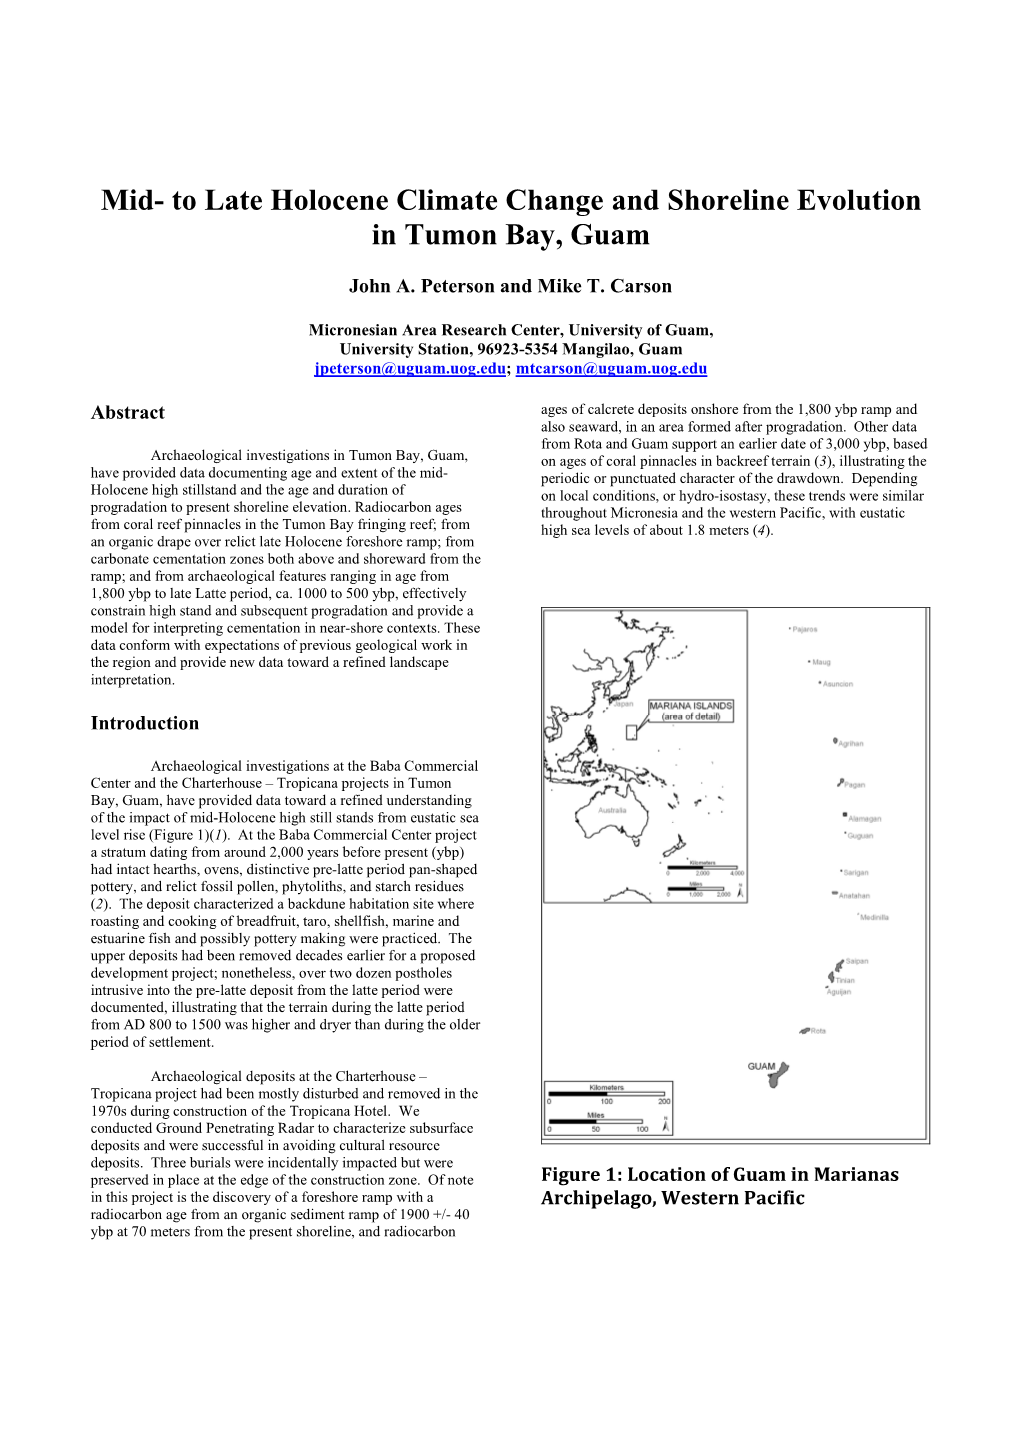 To Late Holocene Climate Change and Shoreline Evolution in Tumon Bay, Guam